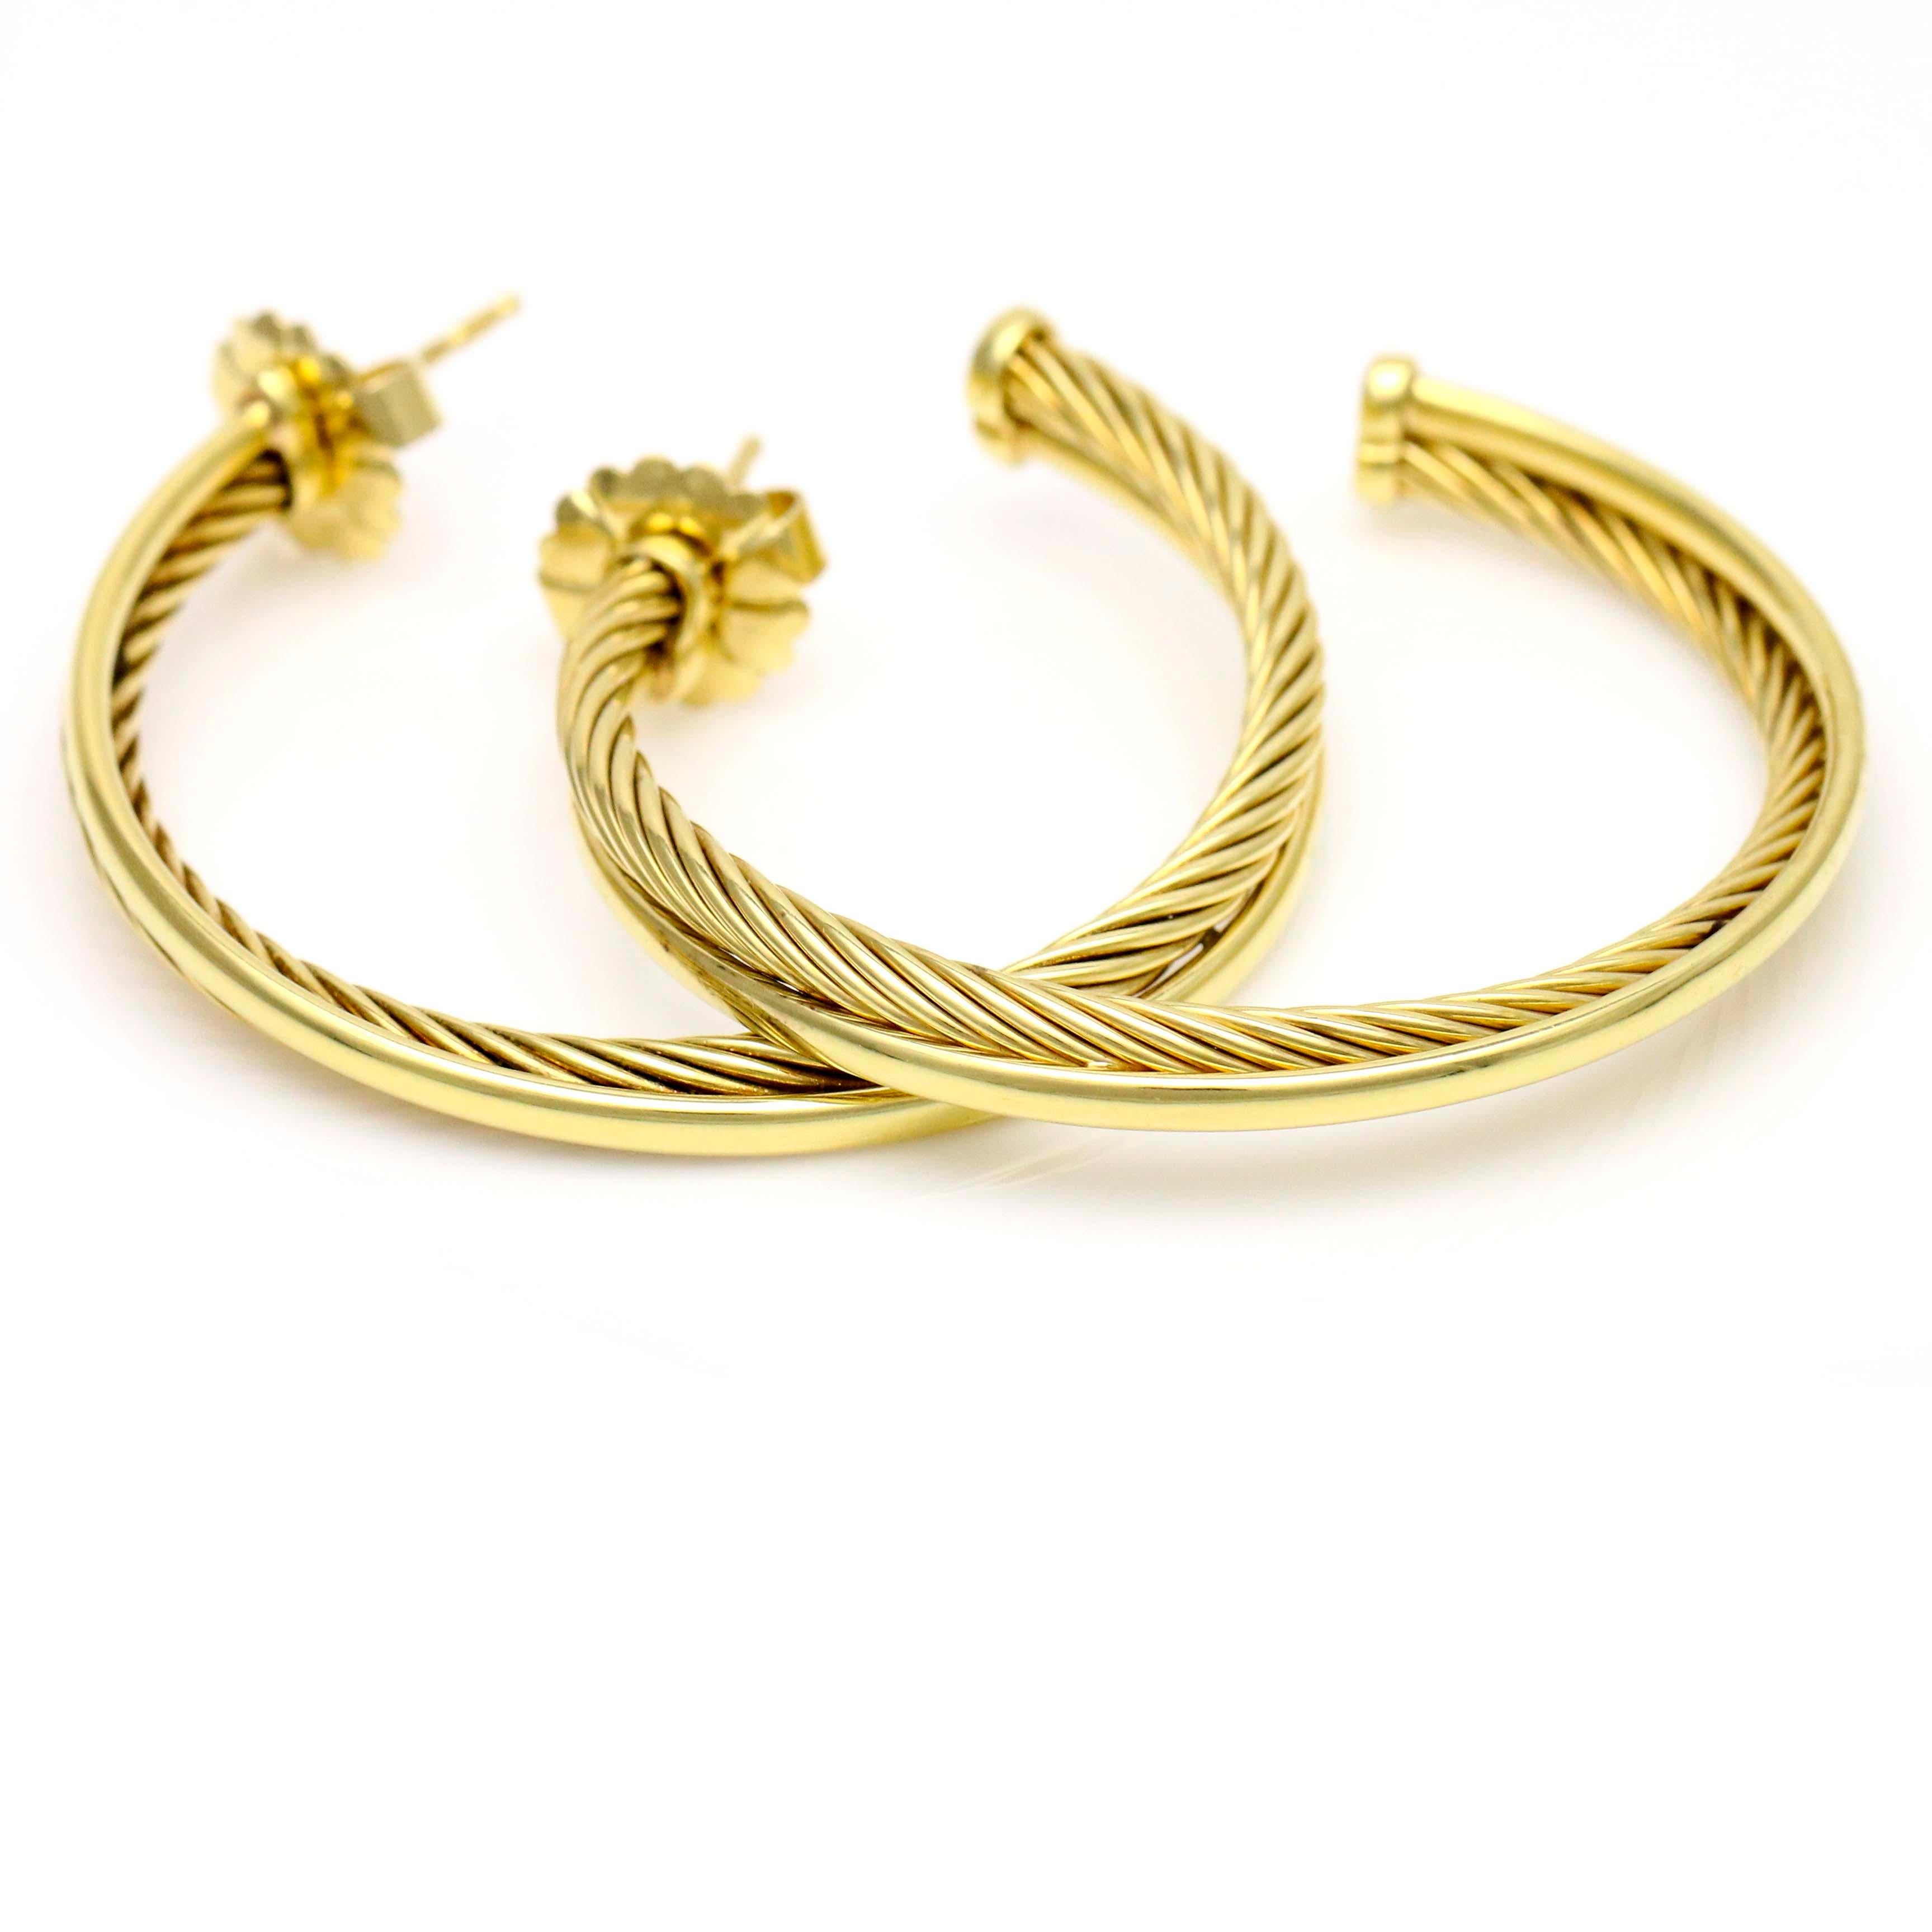 David Yurman 18 Karat Yellow Gold Crossover Hoop Earrings In Excellent Condition For Sale In Fort Lauderdale, FL